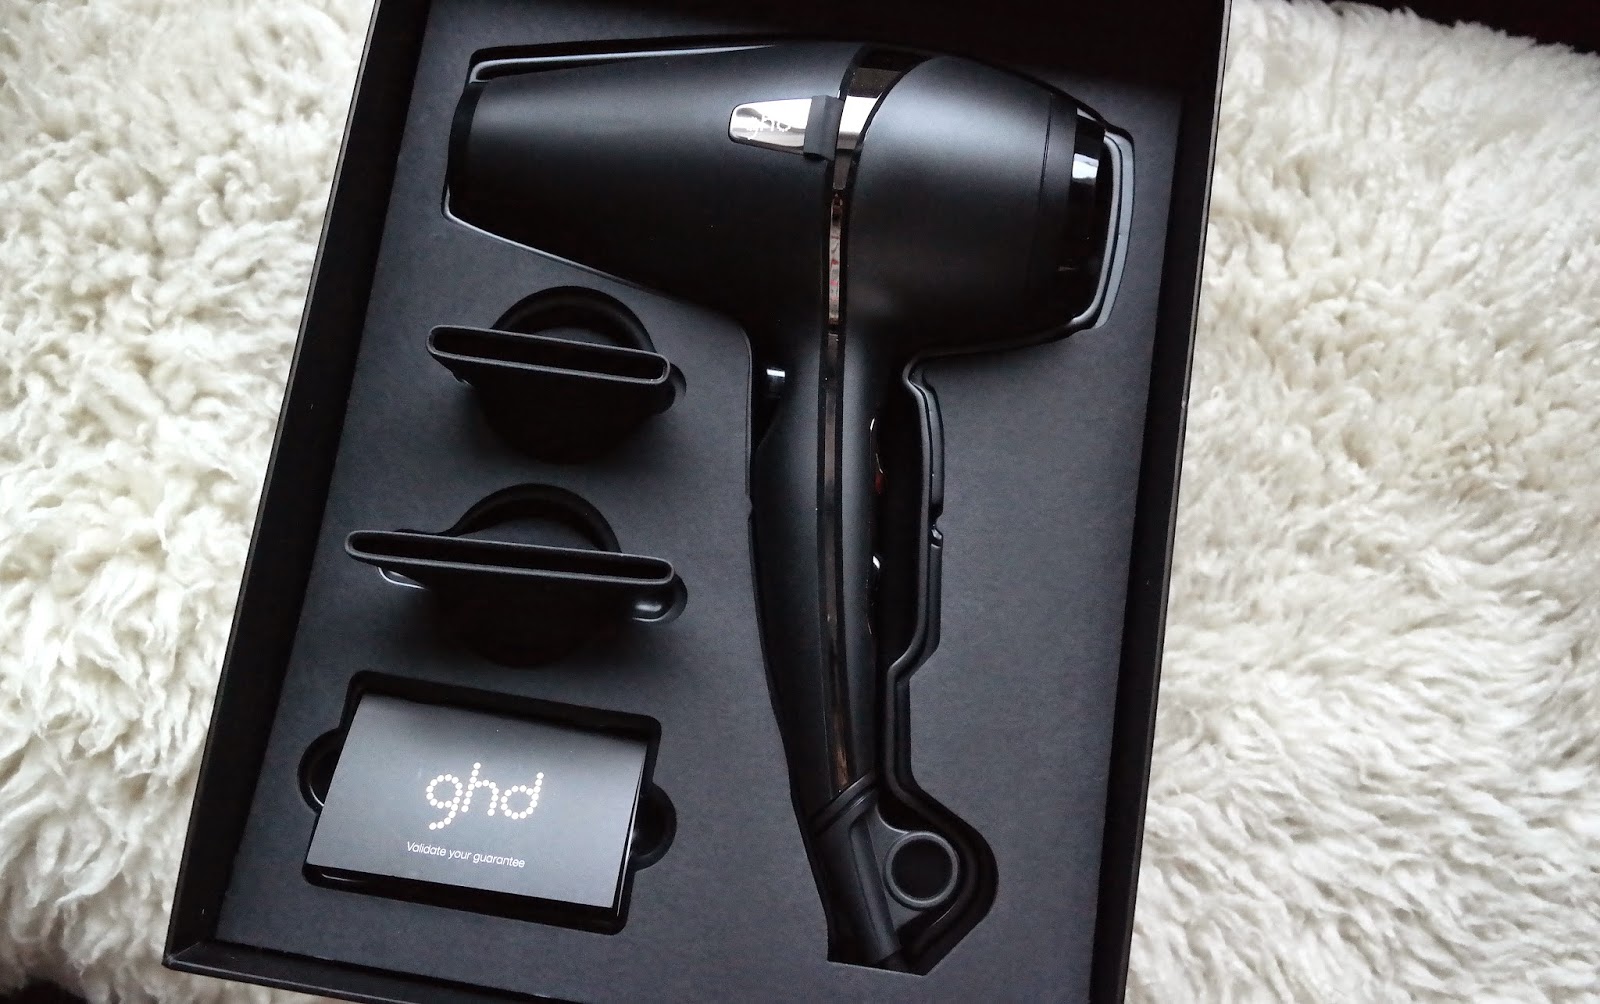 ghd air professional hairdryer review - Jenna Suth